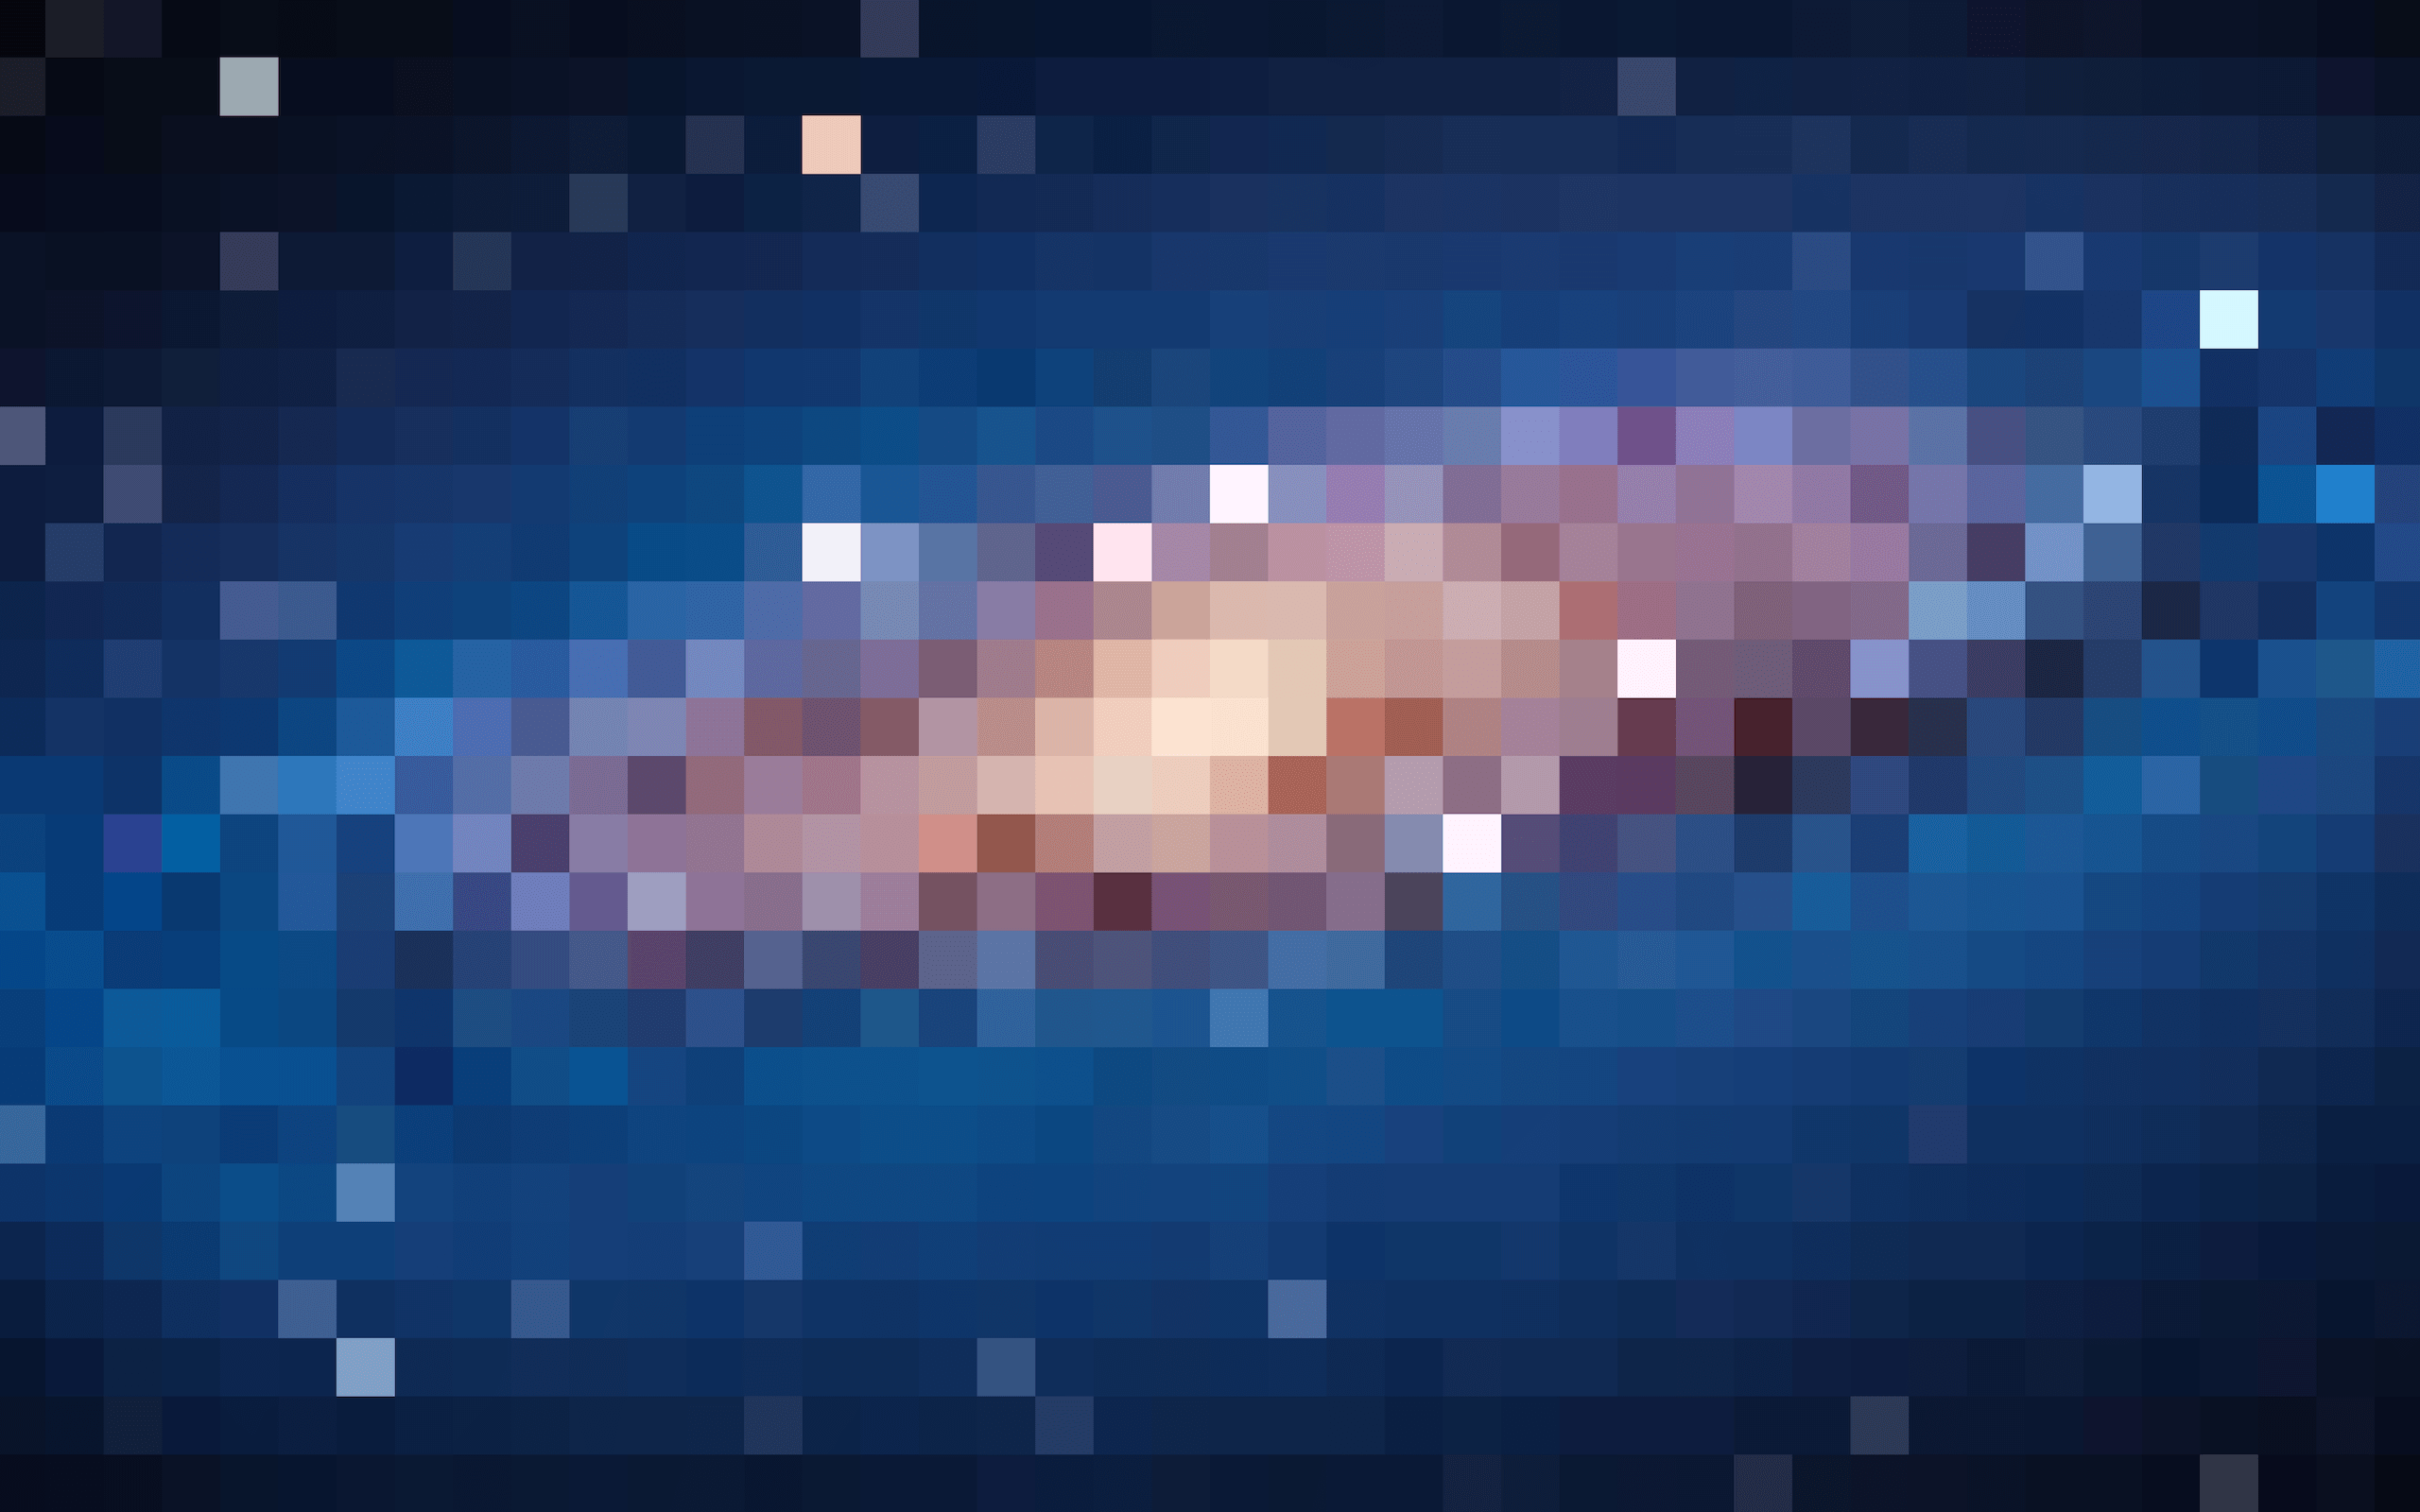 Recreate The Andromeda Galaxy In 8 Bit Pixel Art On Your Lion